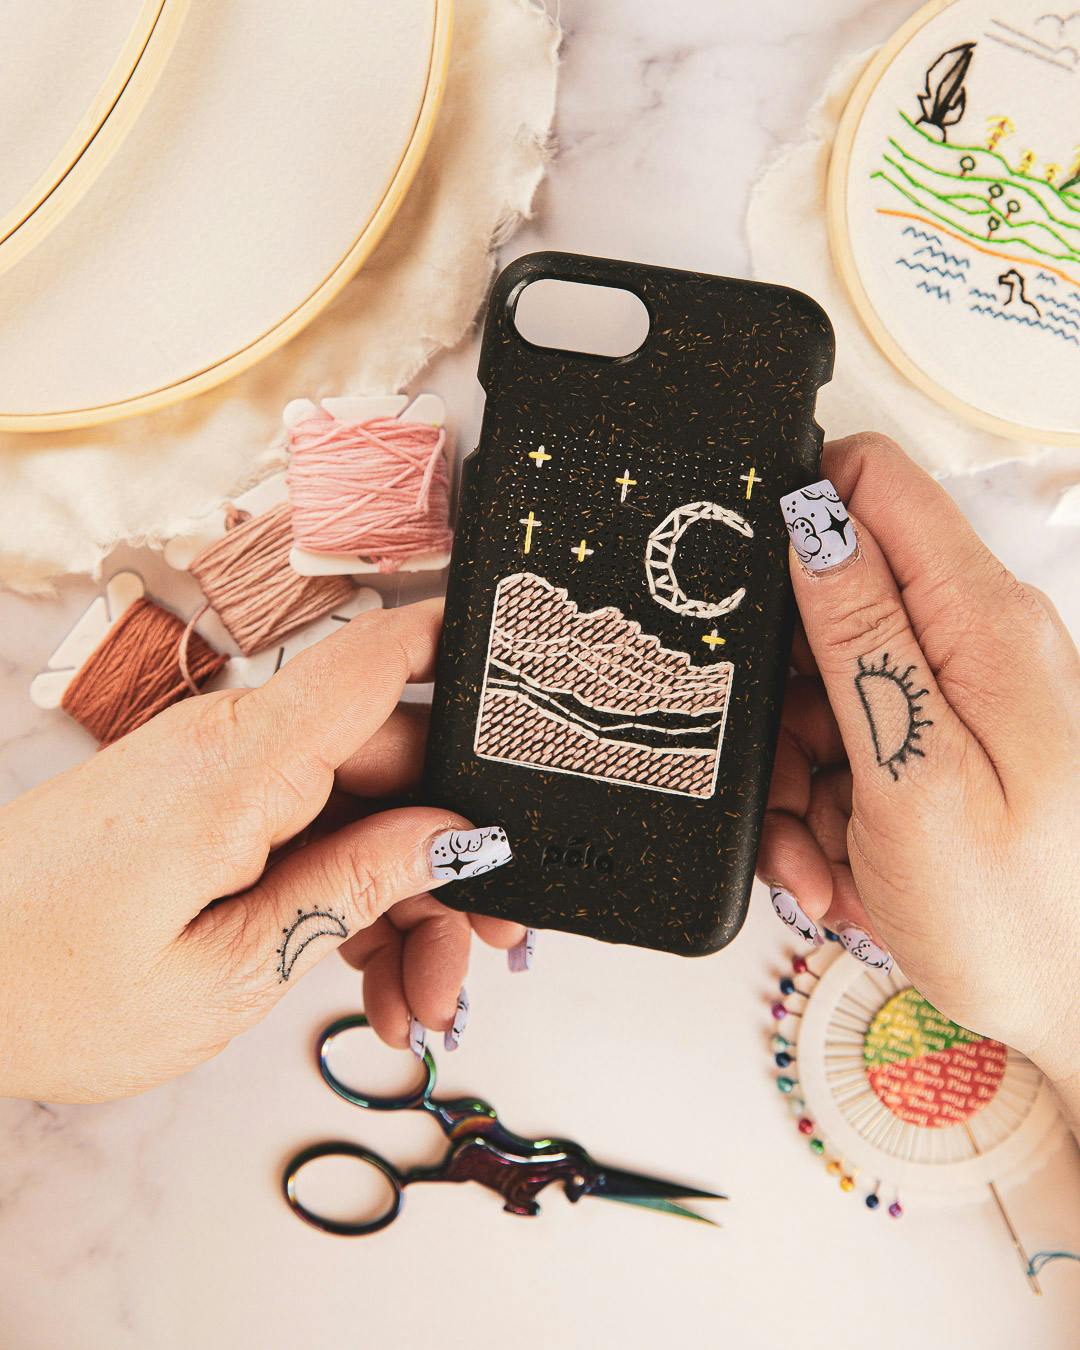 Biodegradable eco-friendly Pela Stitch phone case with embroidered night sky